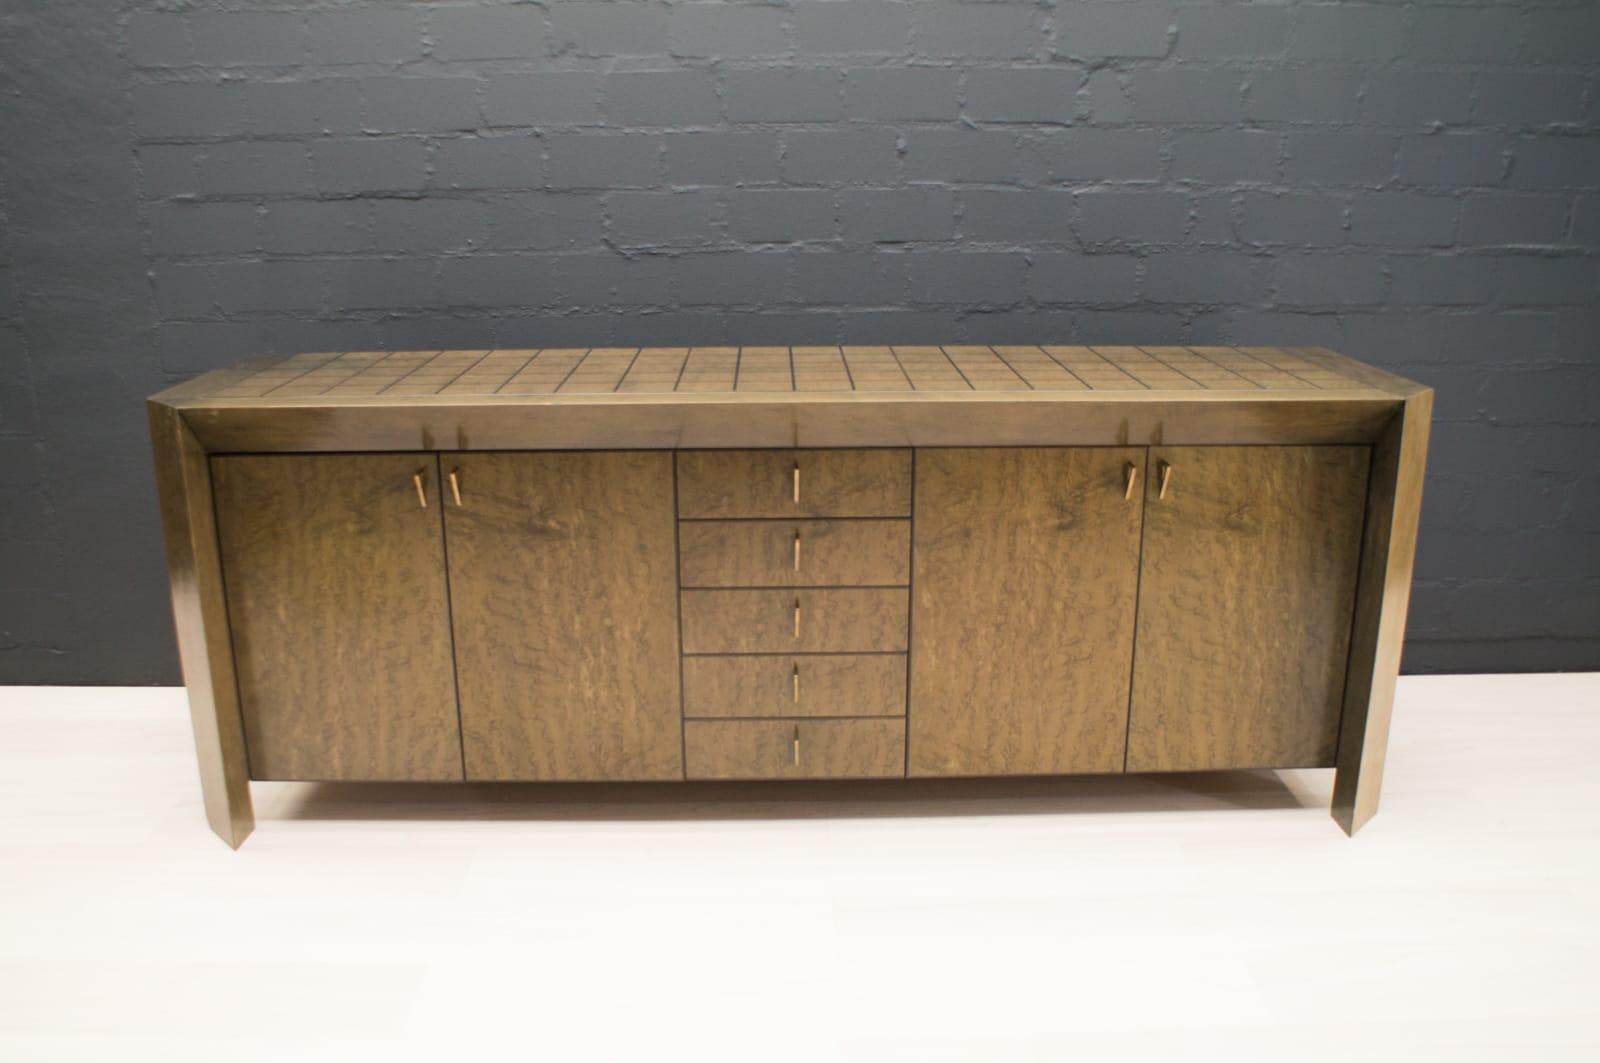 Stunning piece of Italian design, this large luxurious sideboard.
It features a top in bird's-eye maple with a modern, grid pattern decoration. Gorgeous design with some wear.

With this sideboard is also available a dining table. When bought as